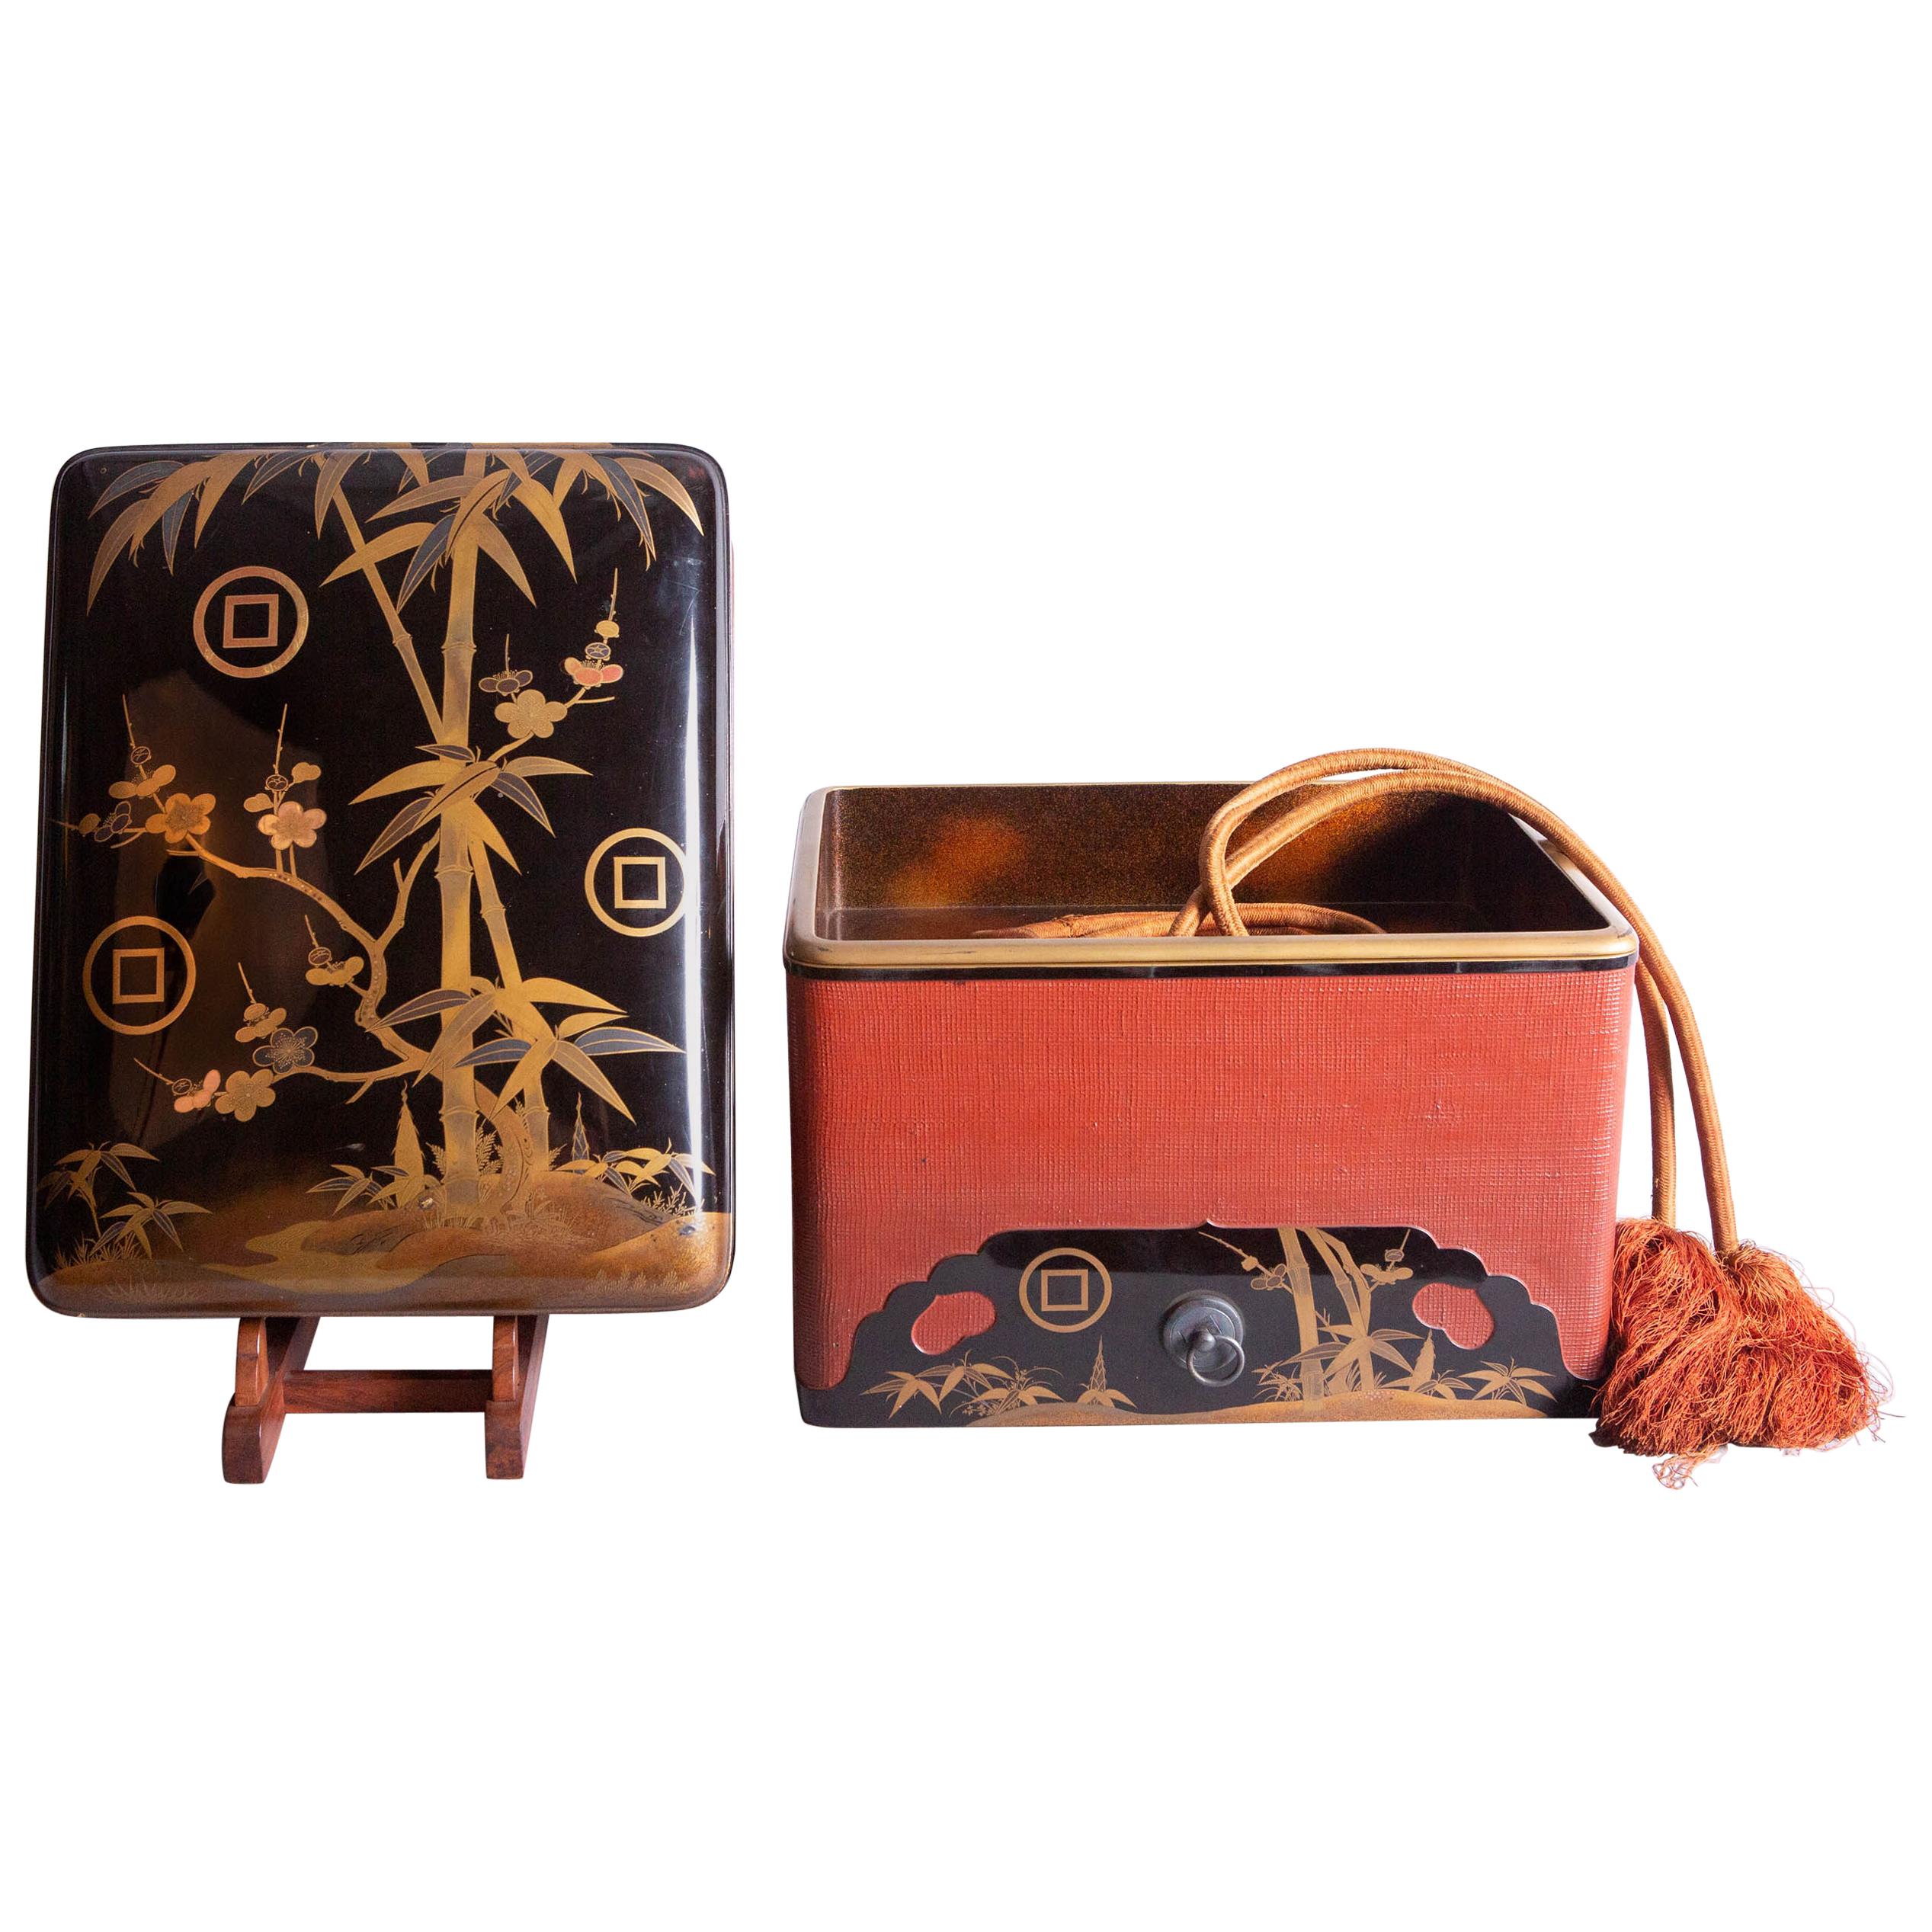 Japanese Lacquer Box with Bamboo, Plum, and Family Crest